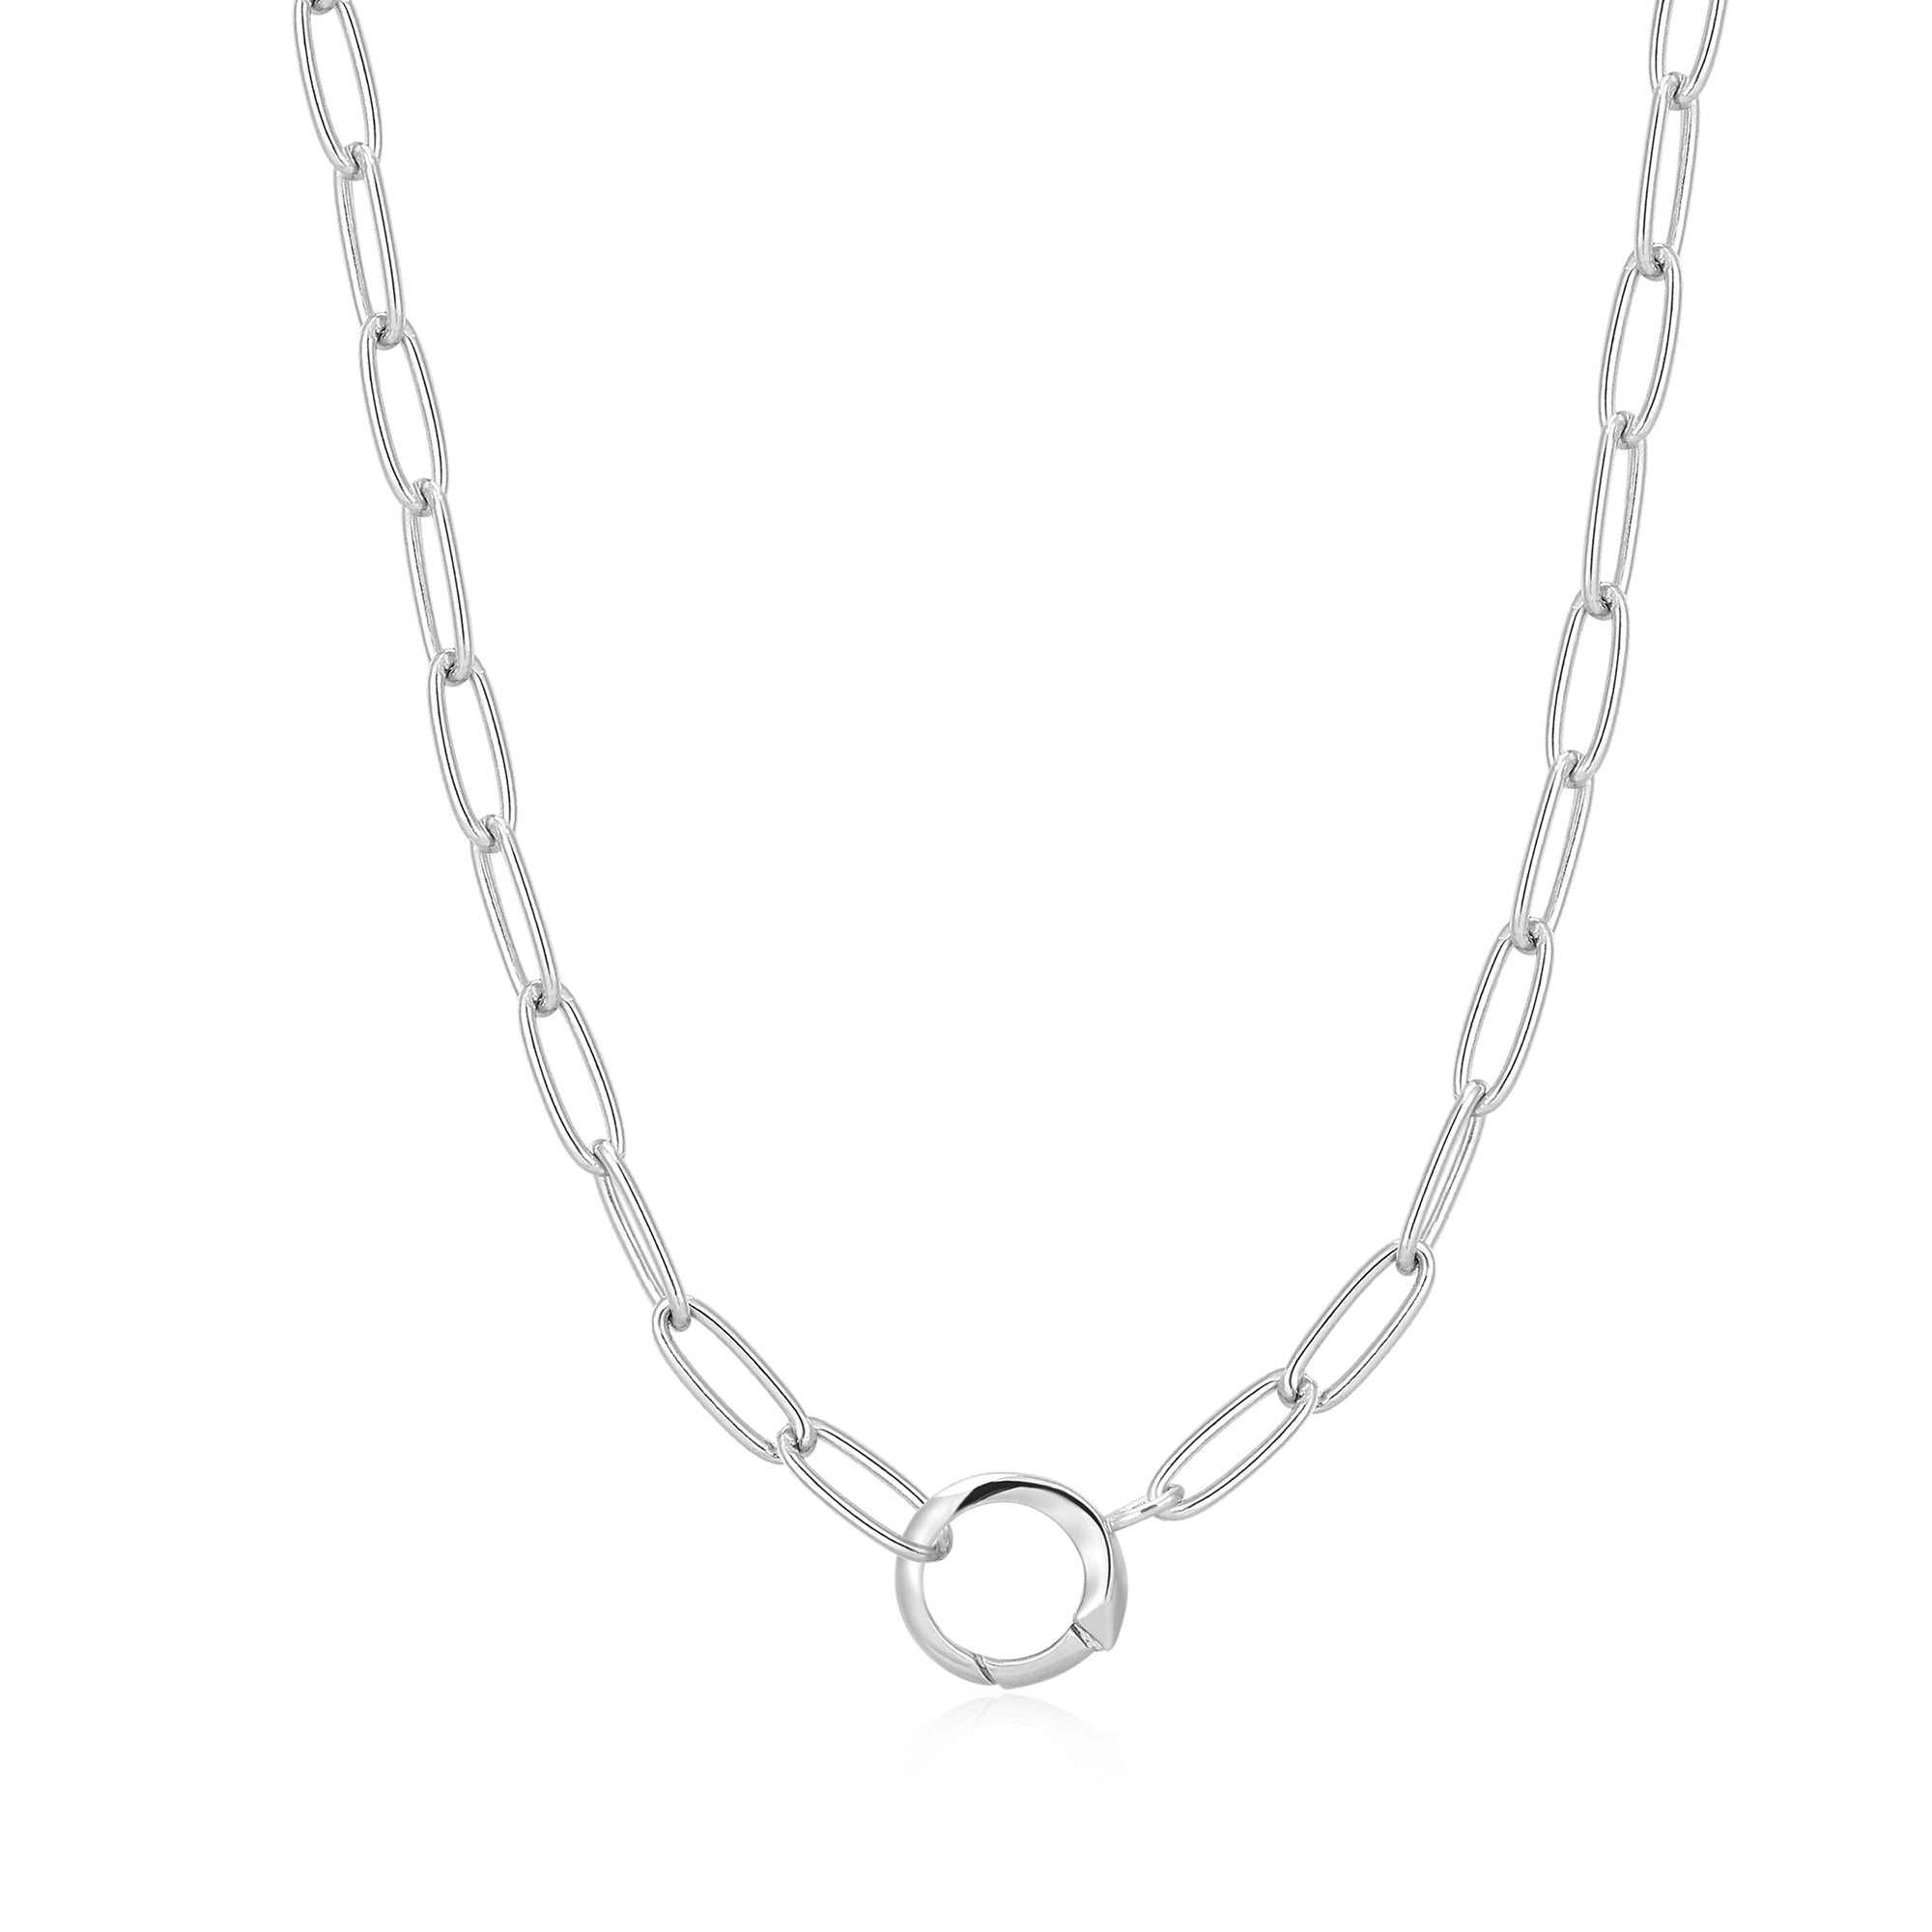 Silver Link Charm Chain Connector Necklace - Ania Haie